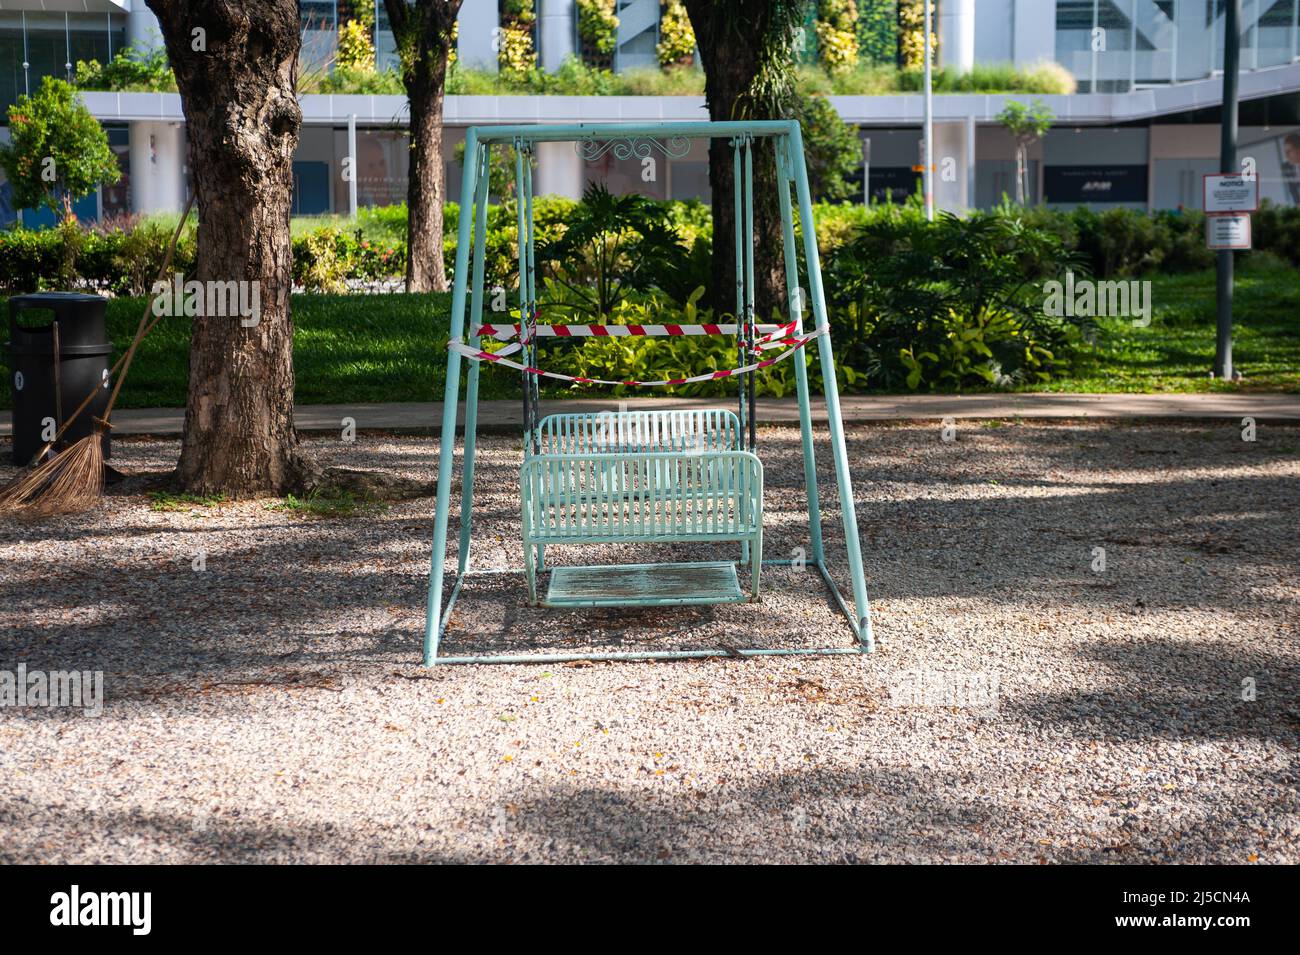 May 28, 2020, Singapore, Republic of Singapore, Asia - A swing set in a small park in Dhoby Ghaut has been cordoned off with red and white barrier tape during curfews amid the Corona crisis to halt the spread of the pandemic coronavirus (Covid-19). Other precautionary measures were introduced in public life, such as the closure of all non-essential shops and retailers, as well as all schools until June 1. [automated translation] Stock Photo